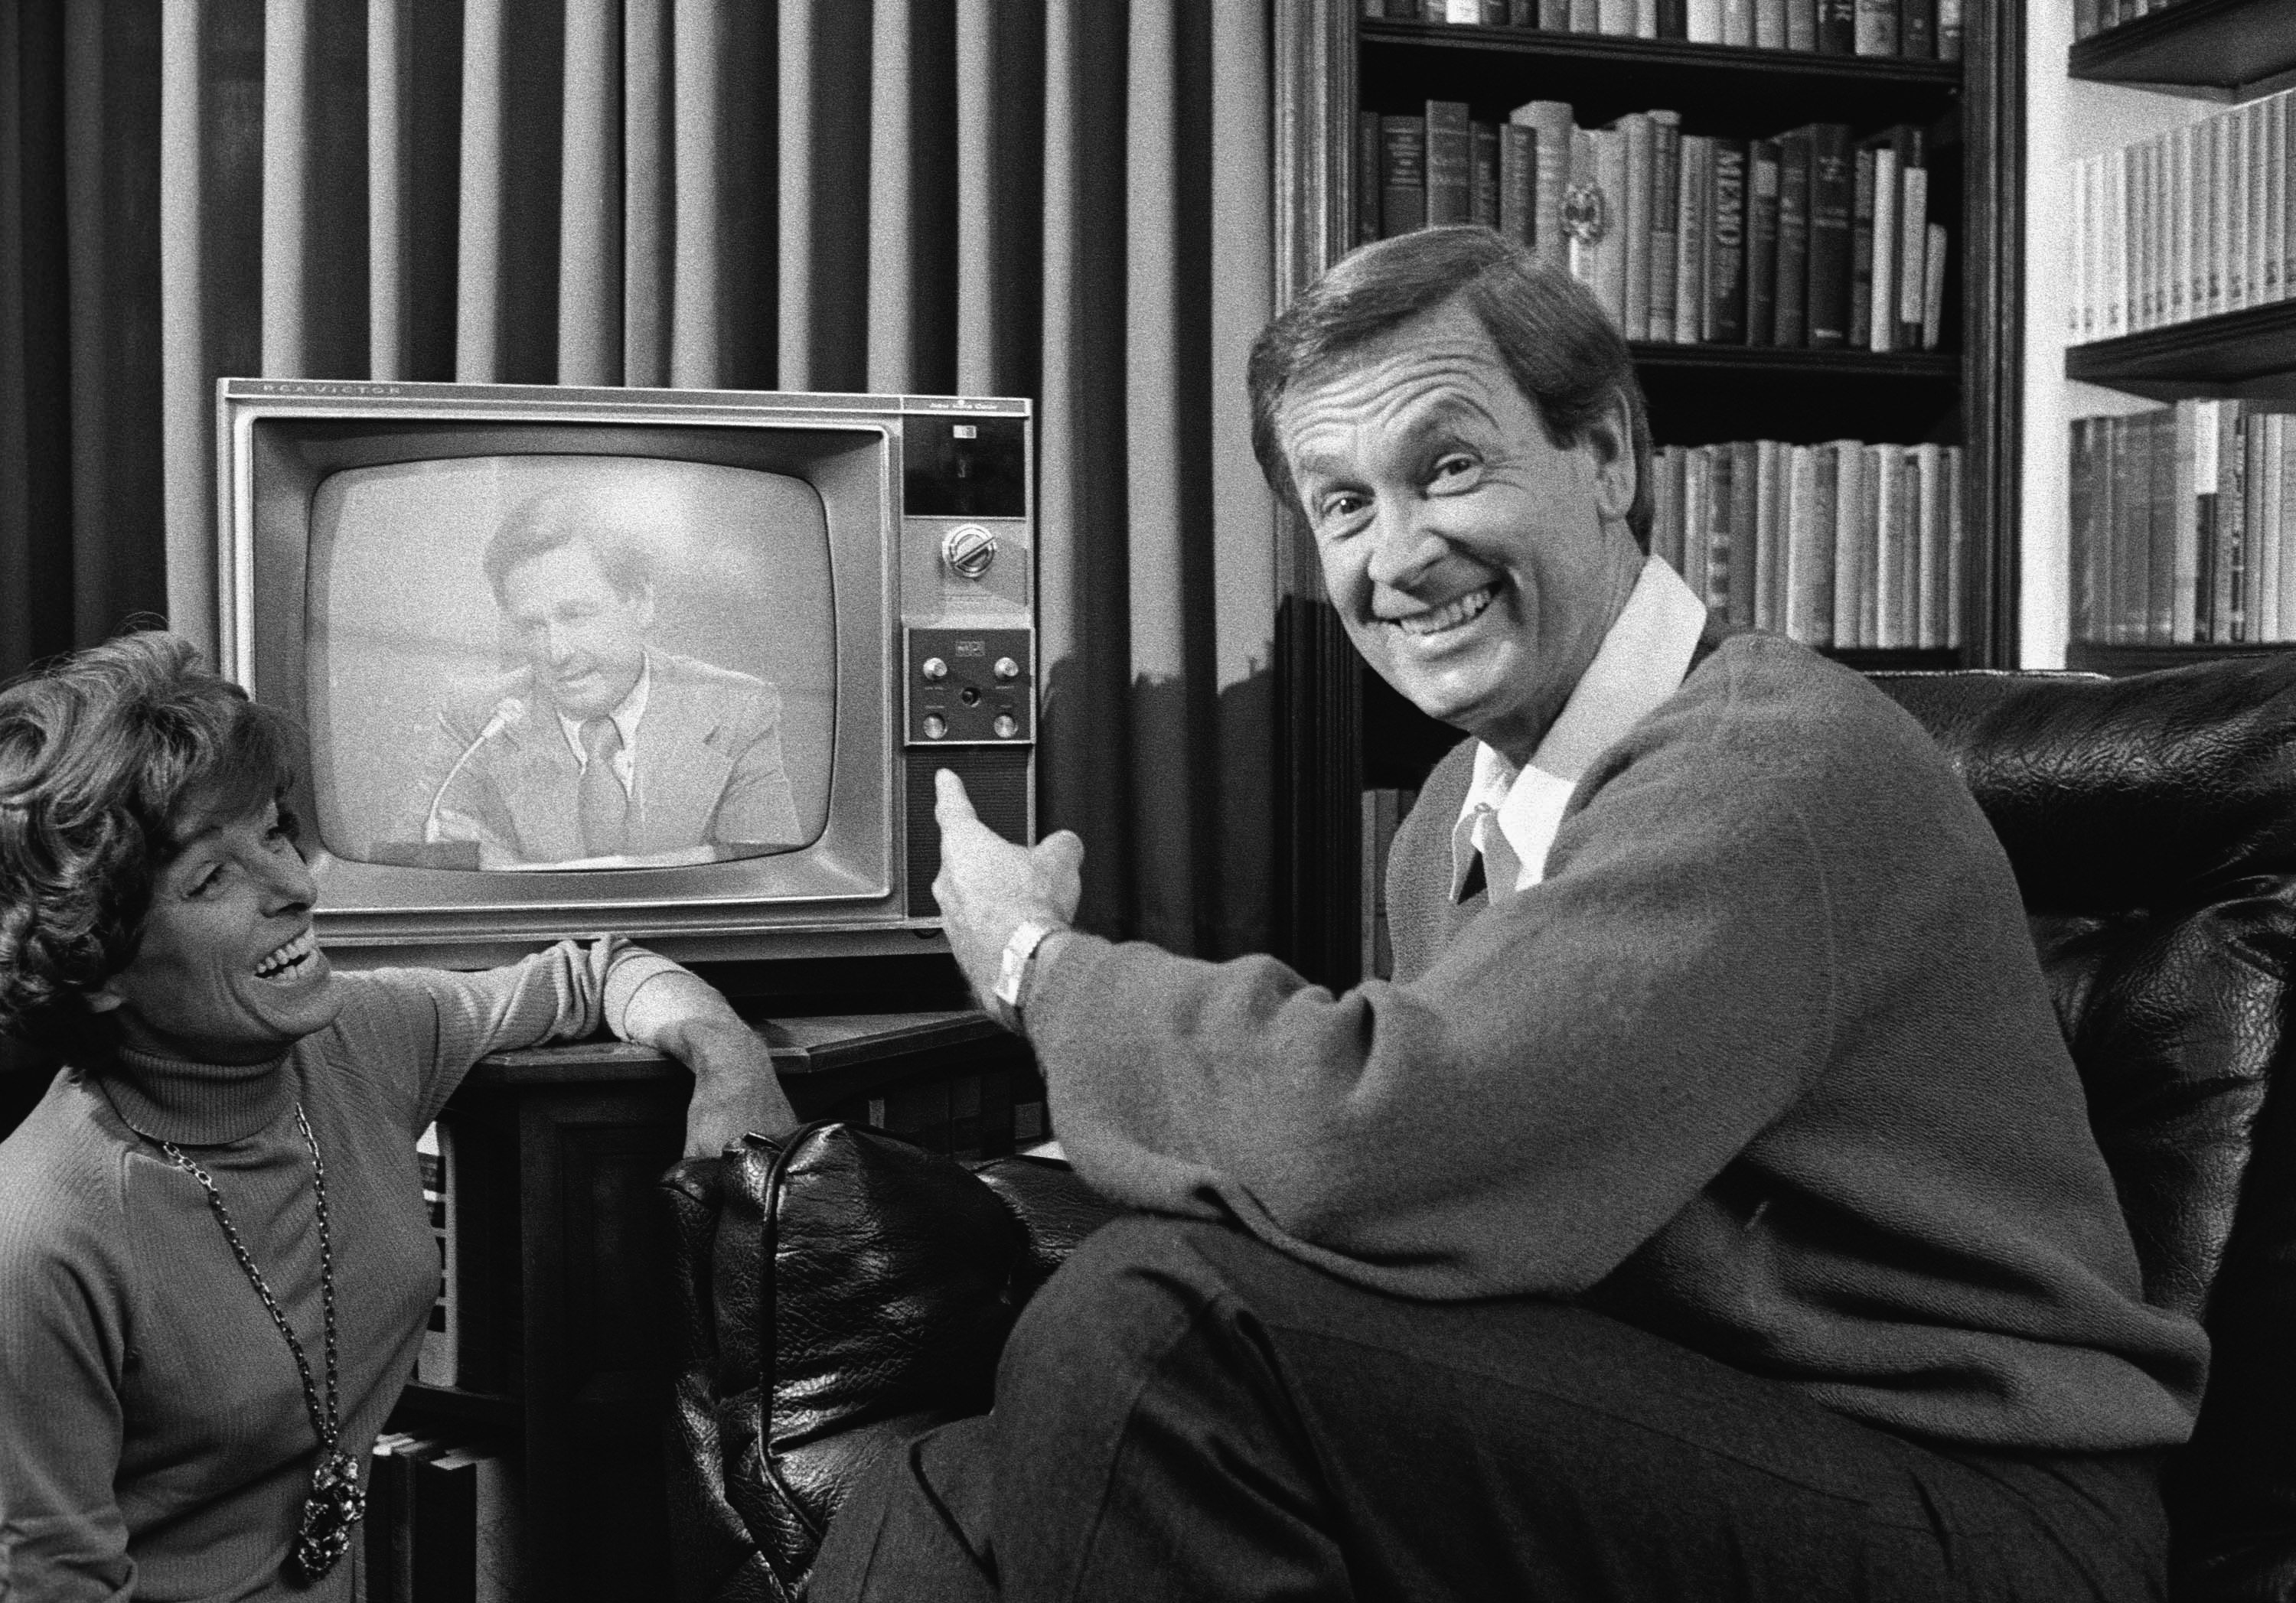 Bob Barker looks at the camera and smiles while he points to himself on a nearby television screen as his wife Dorothy Jo Barker looks on and laughs, on November 4, 1977. | Source: Getty Images